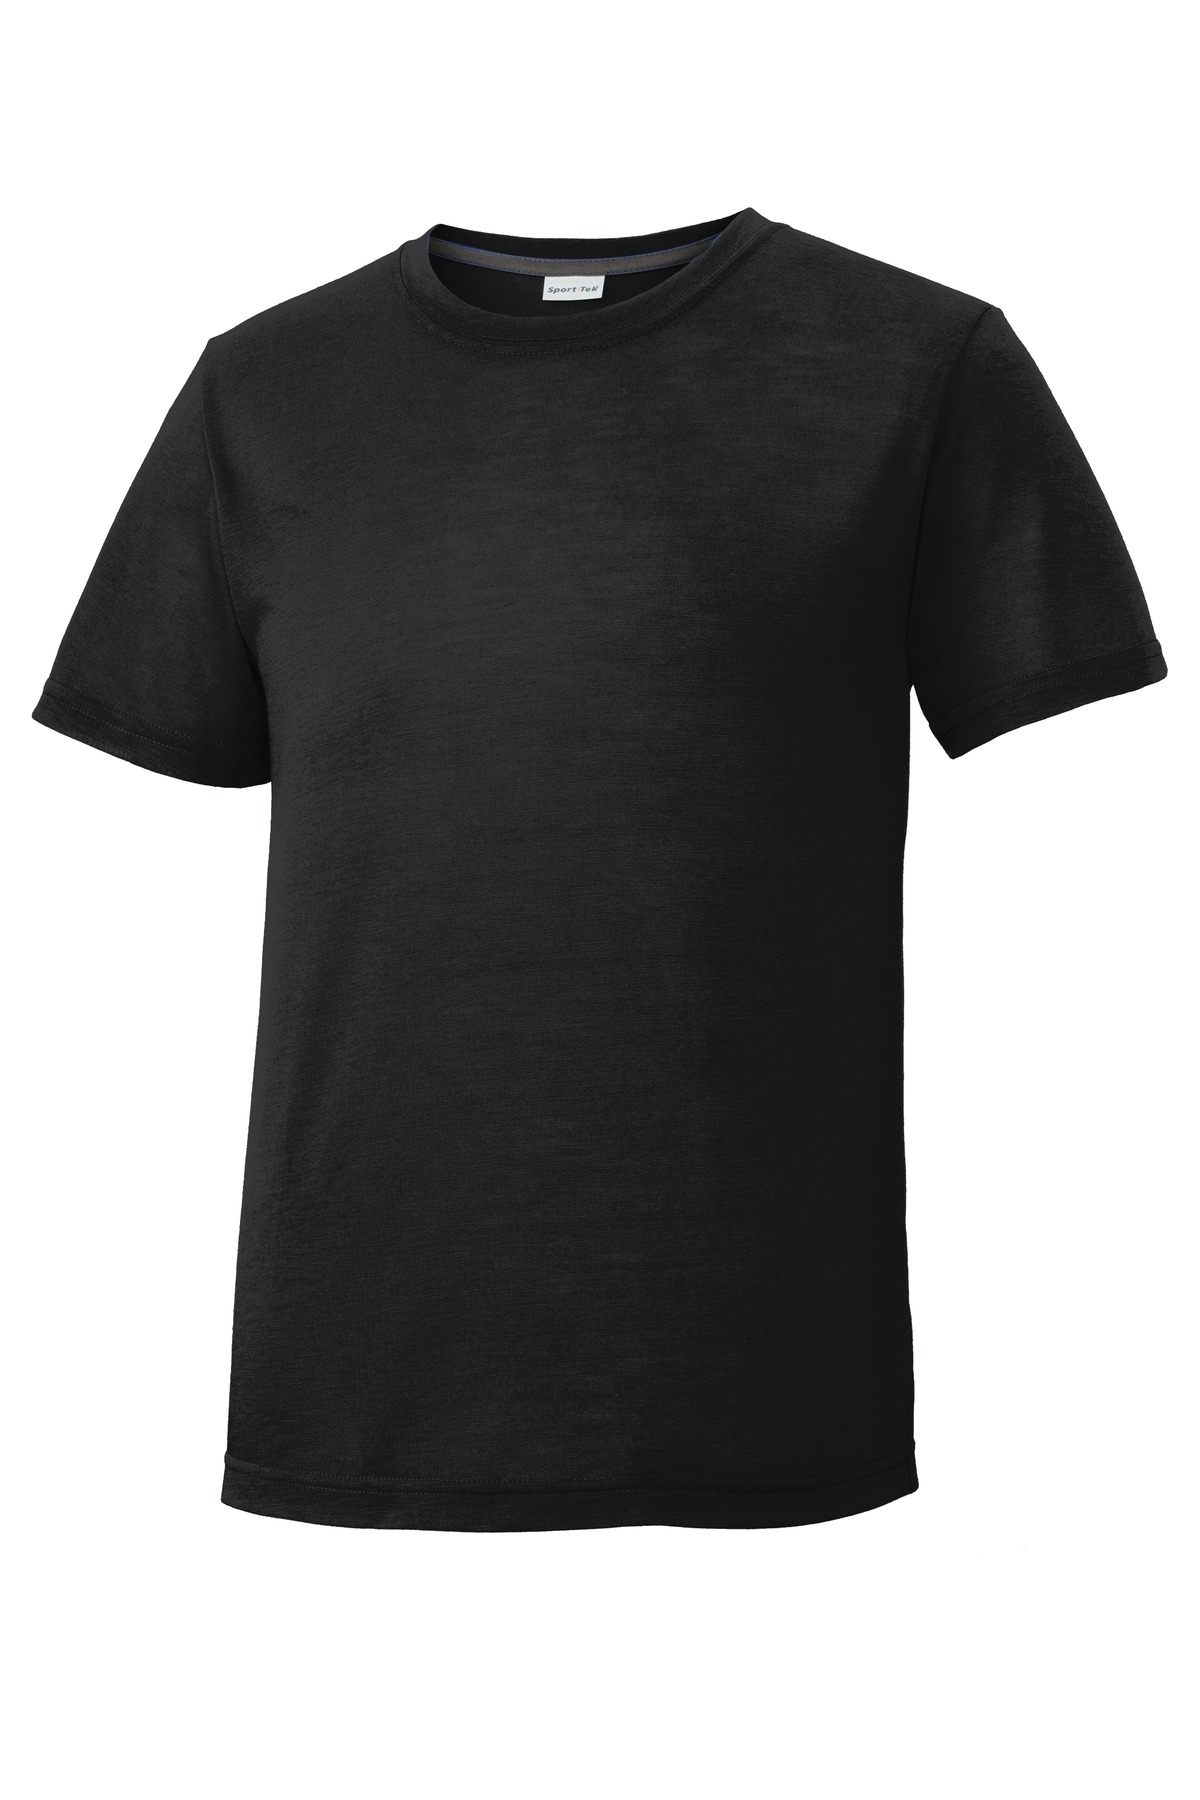 Sport-Tek Youth PosiCharge Competitor Cotton Touch Tee-